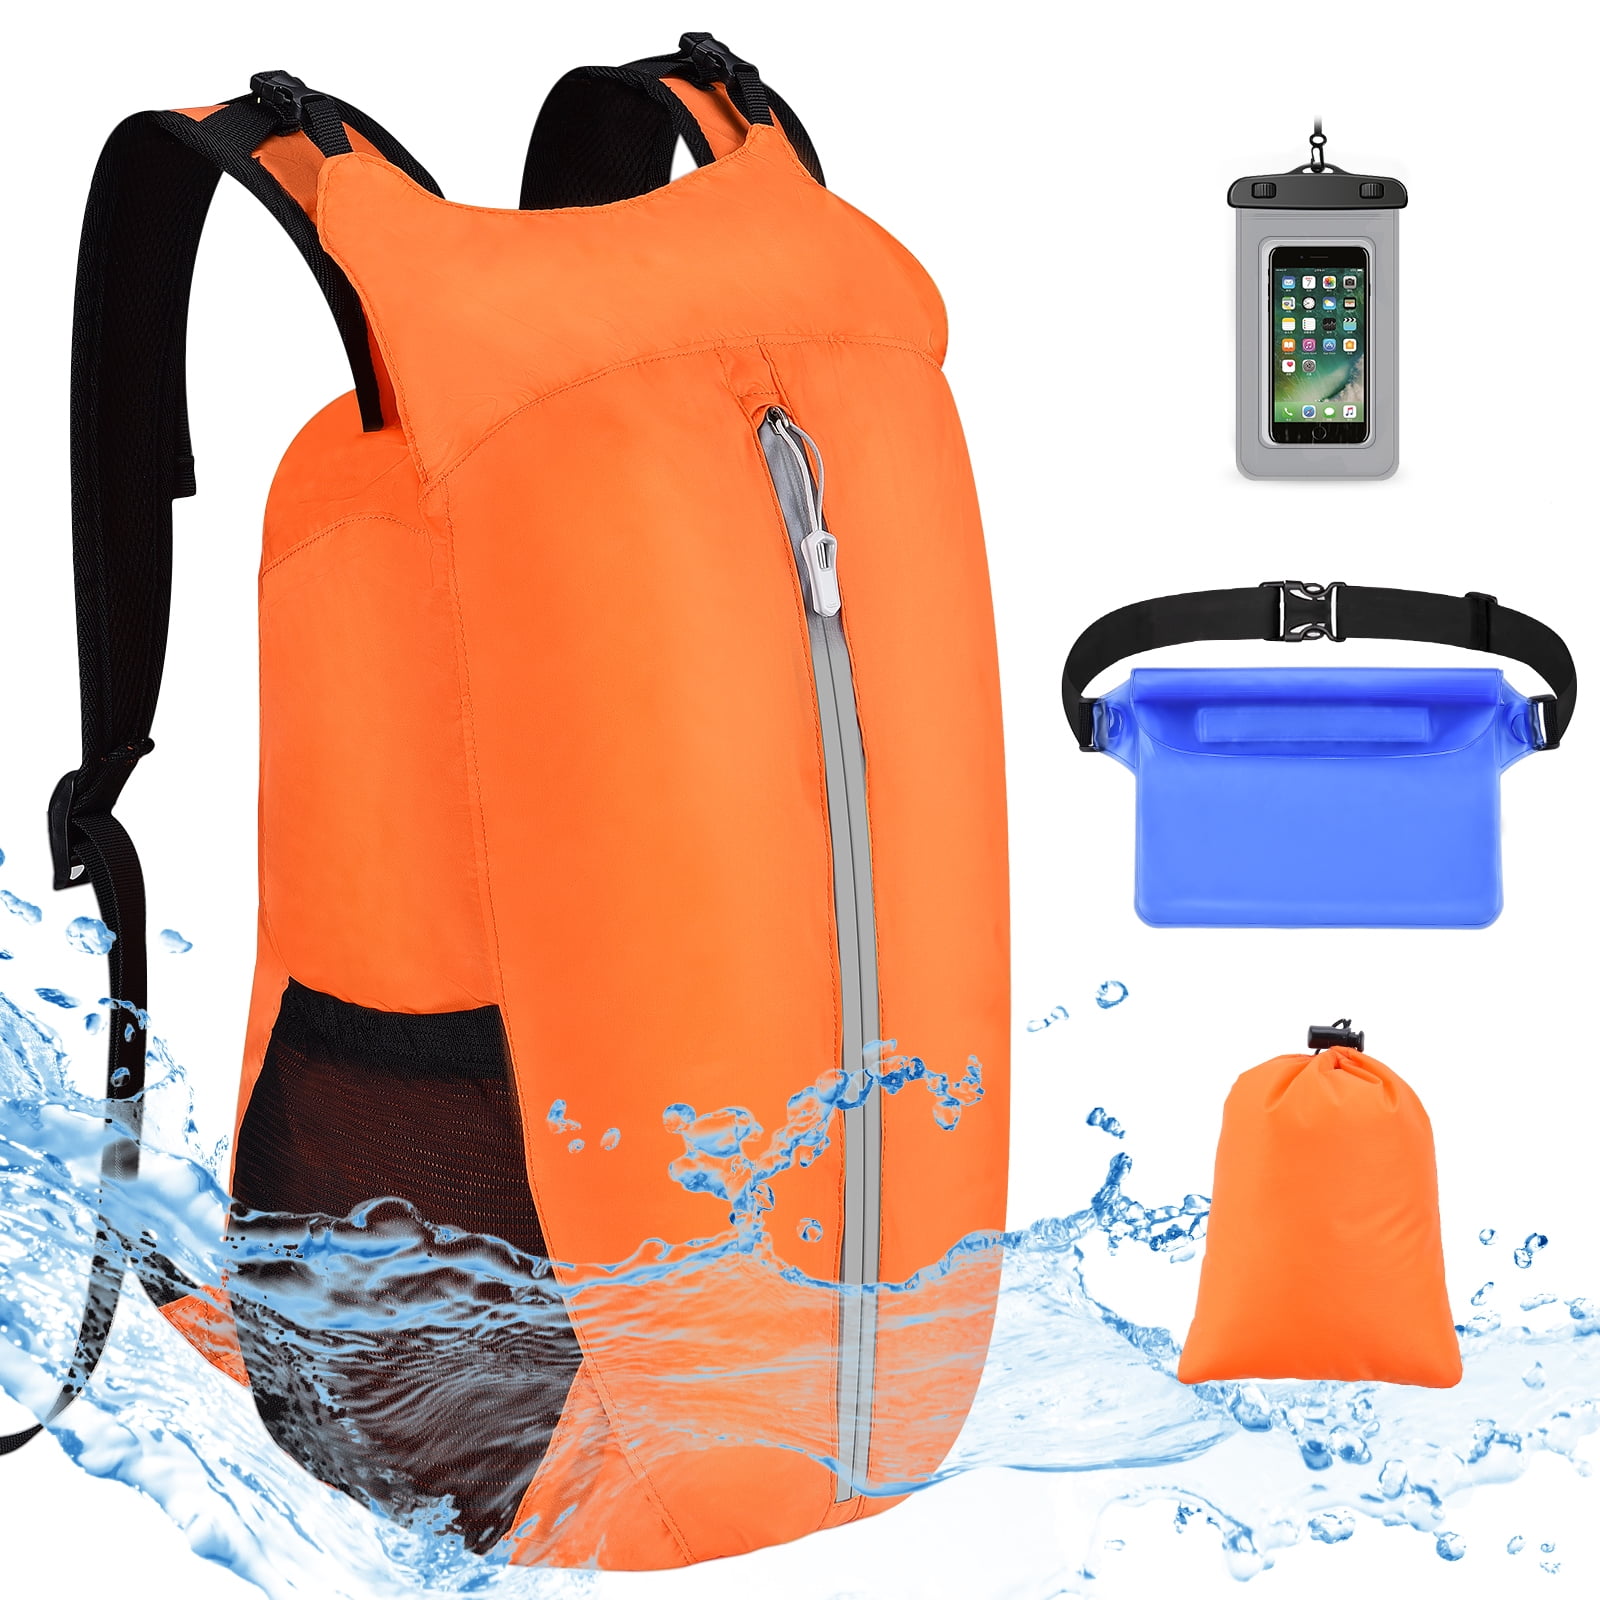 waterroof pouch for attaching to backpack